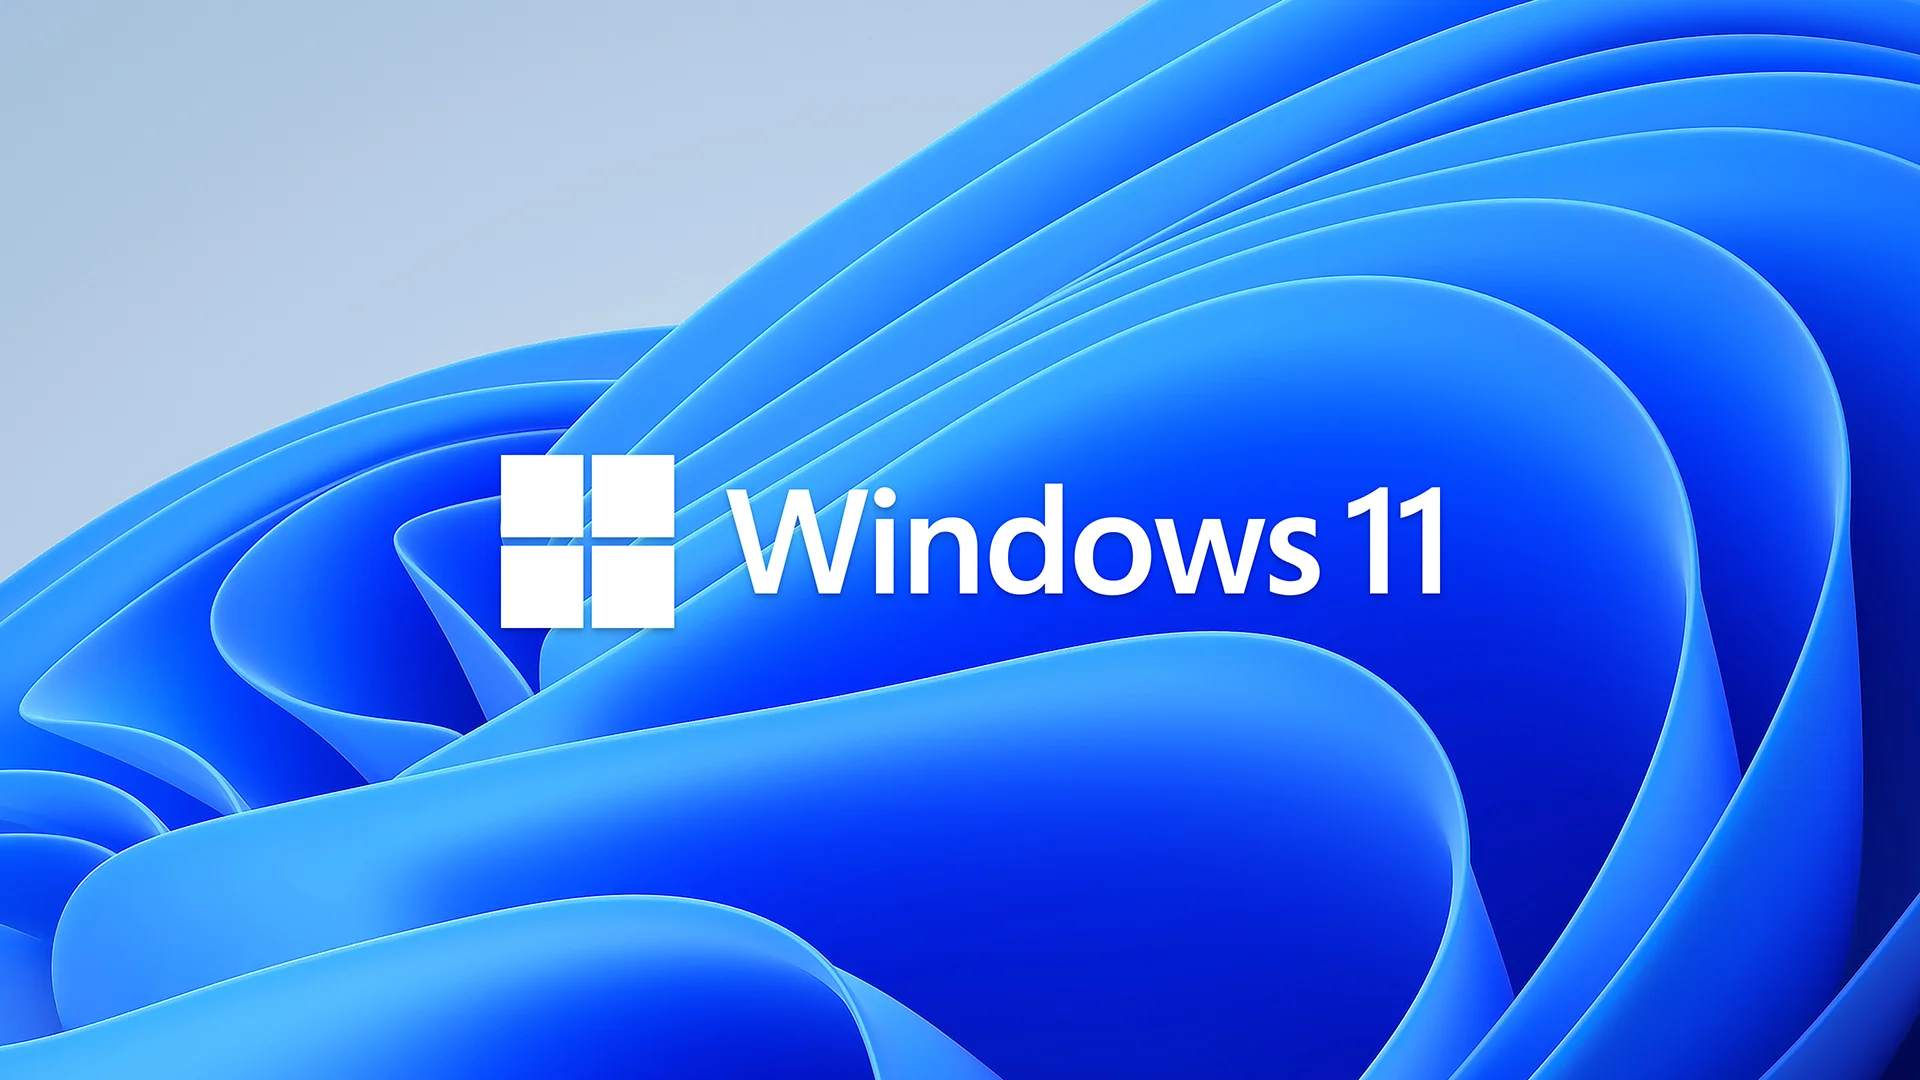 About Windows 11